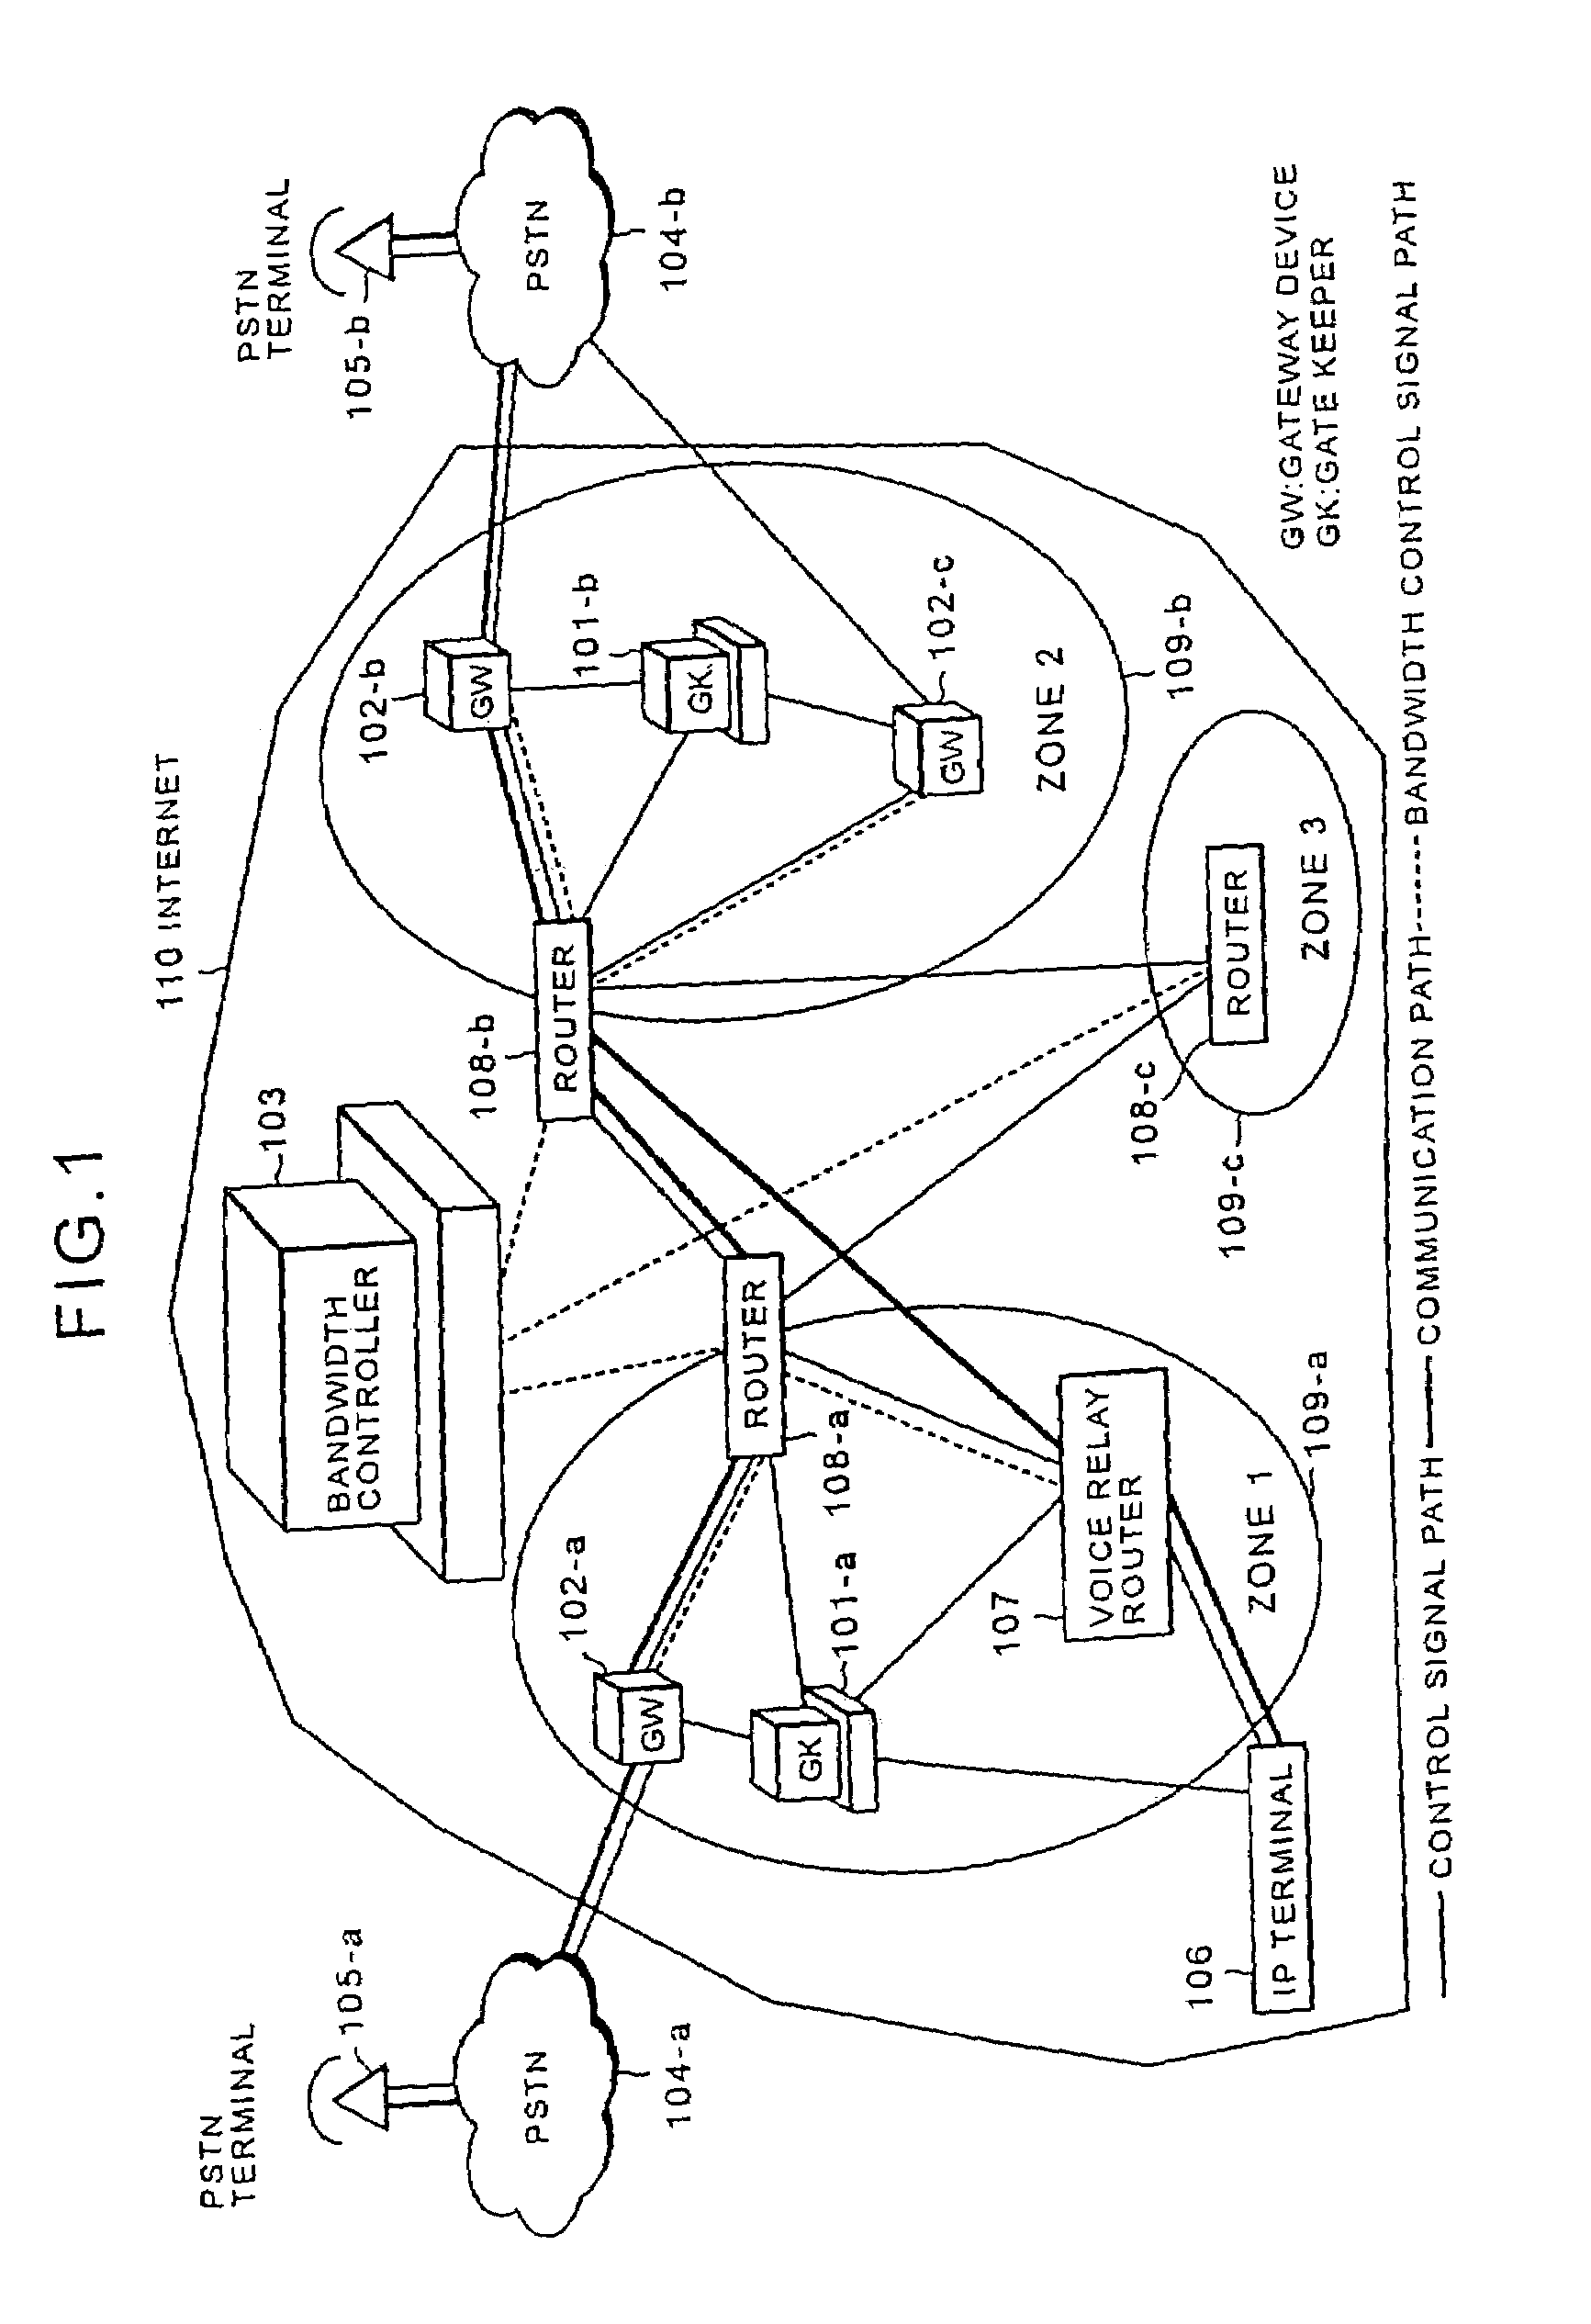 Internet telephone connection method, bandwidth controller and gate keeper